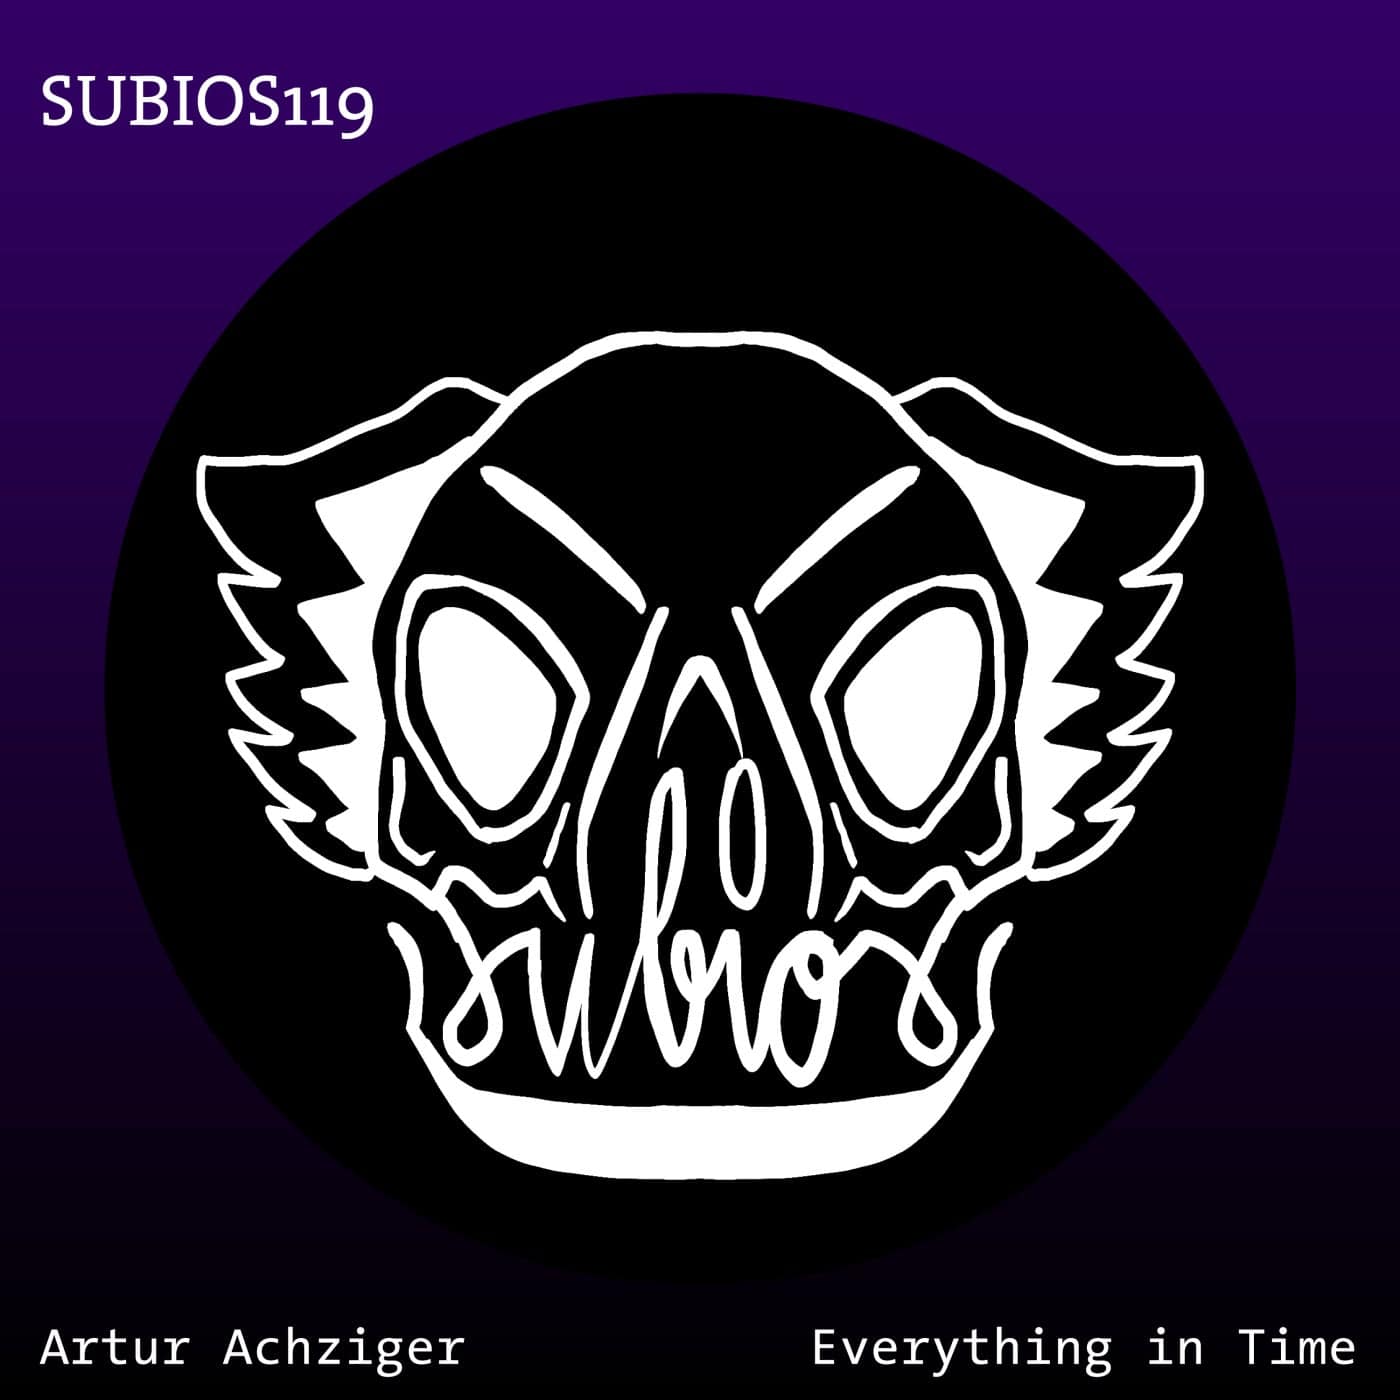 image cover: Everything in Time by Artur Achziger on Subios Records